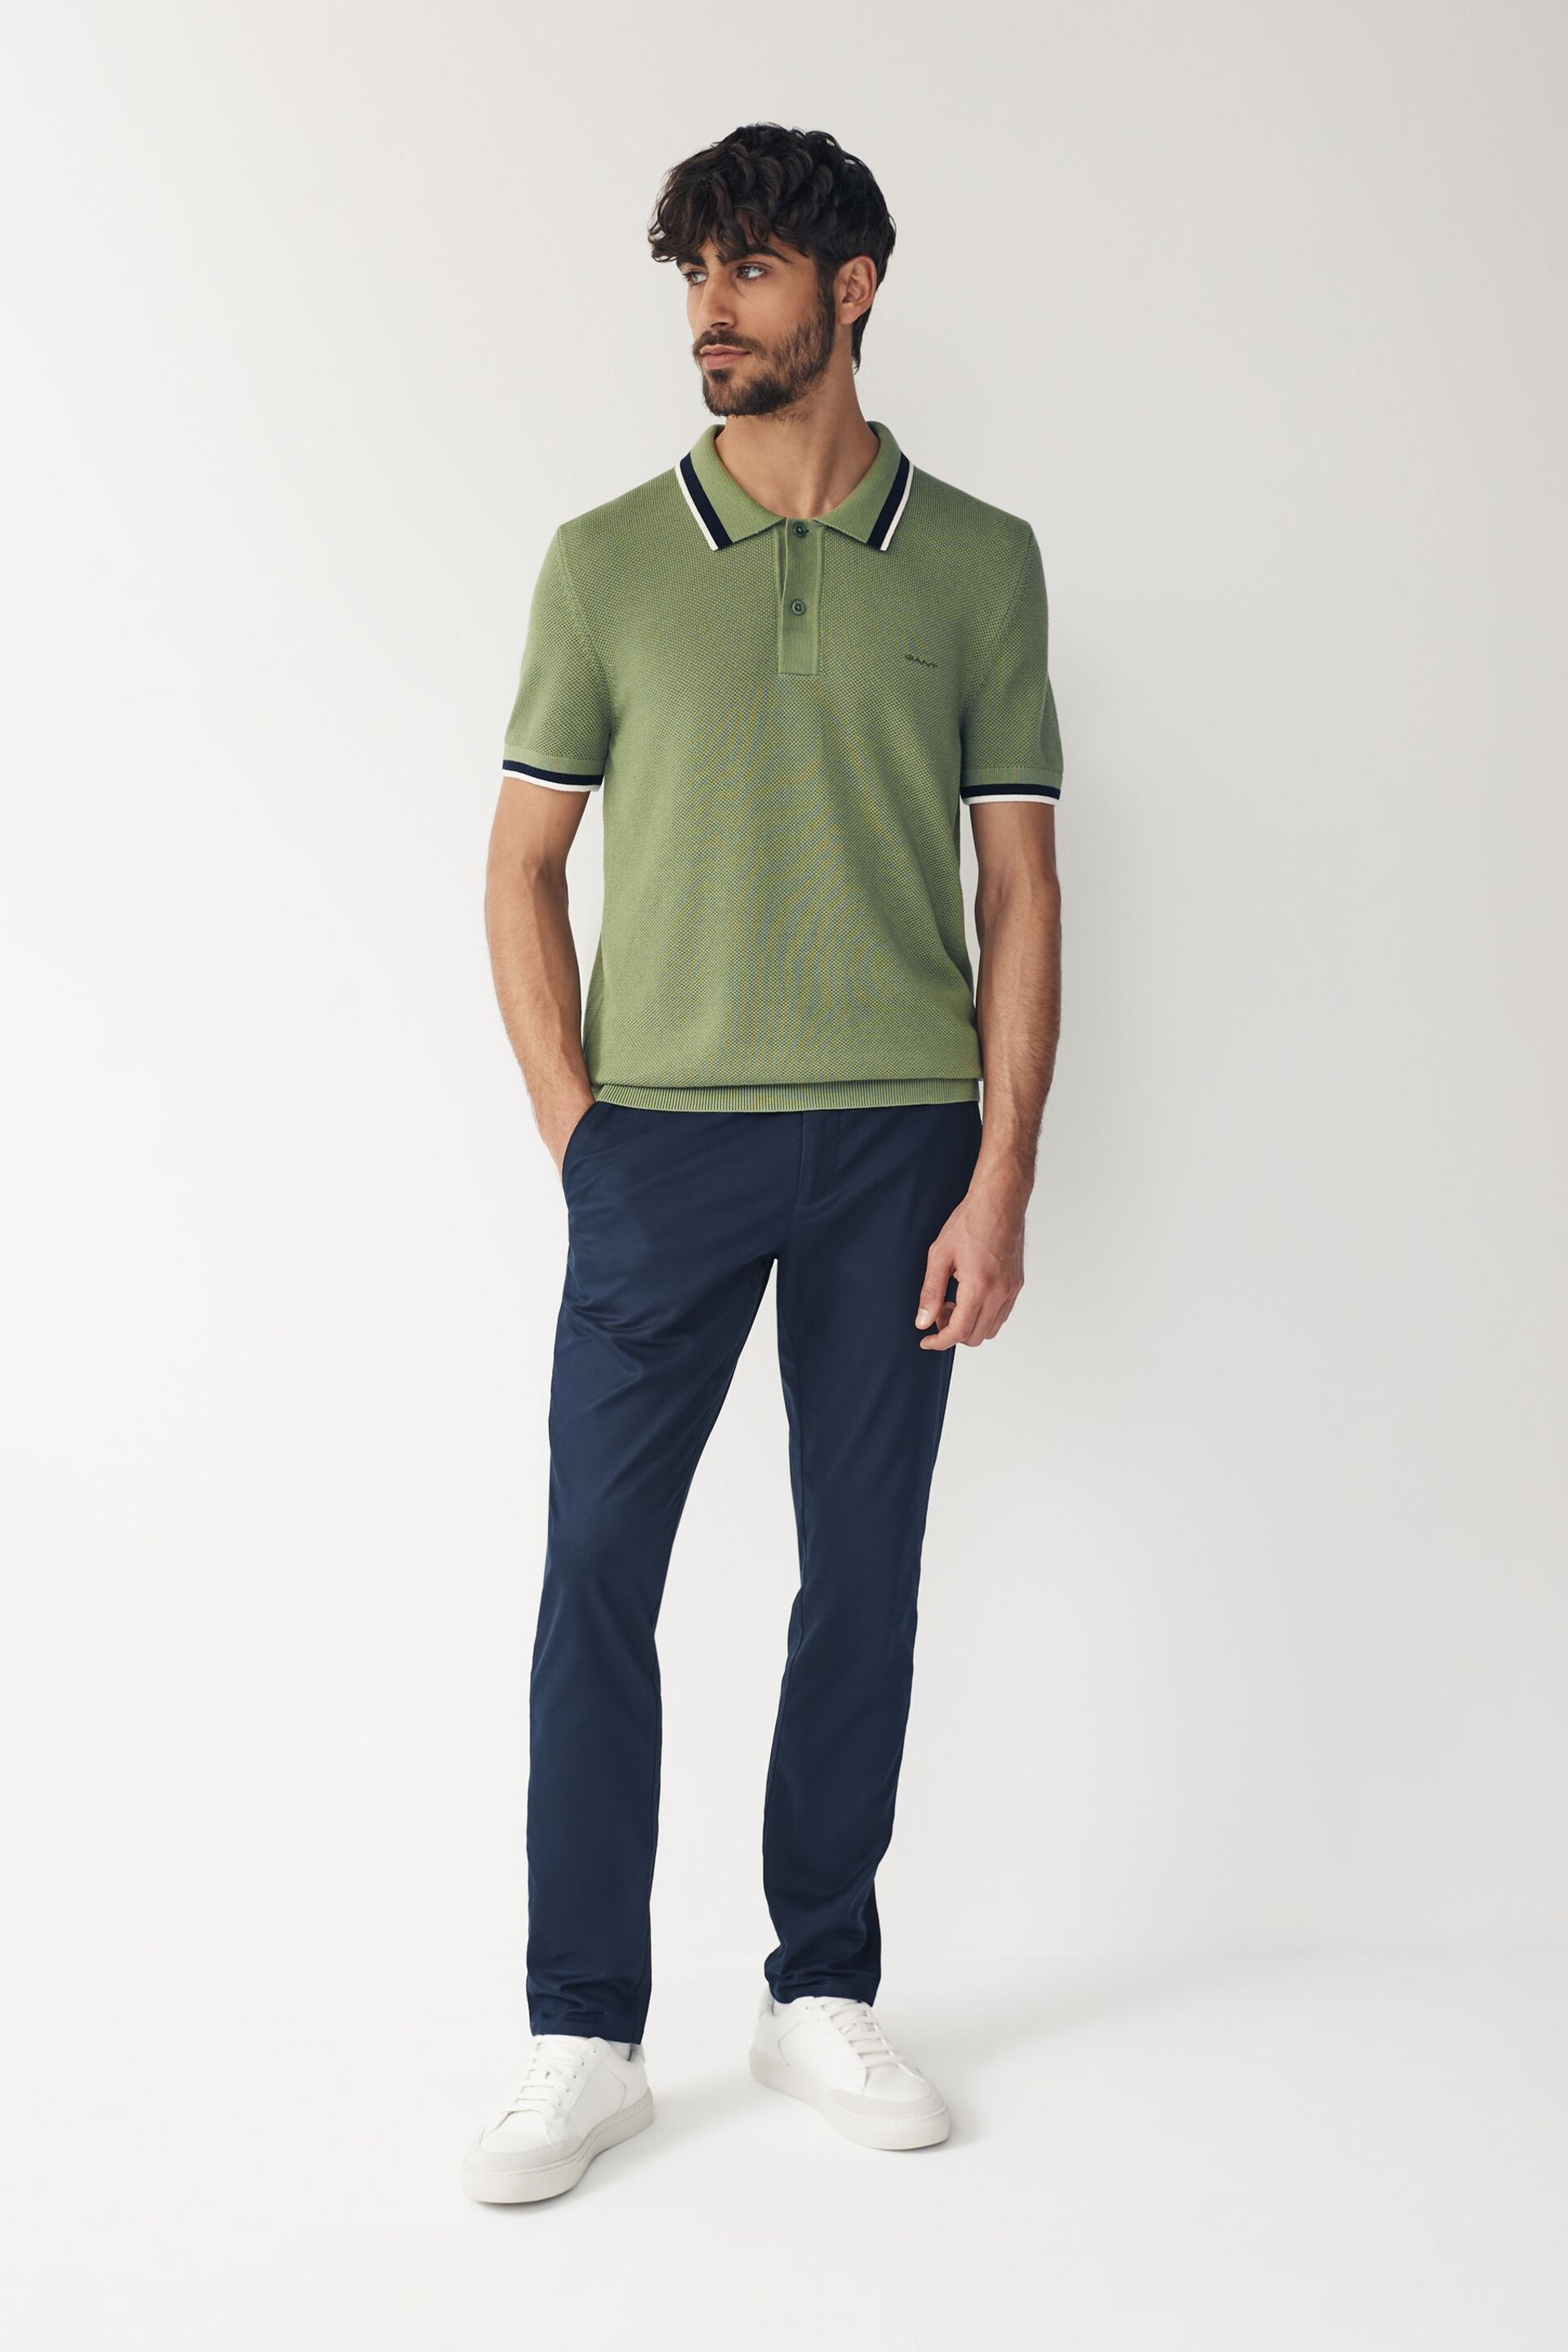 GANT Green Cotton Piqué Knitted Polo Shirt - Image 3 of 5